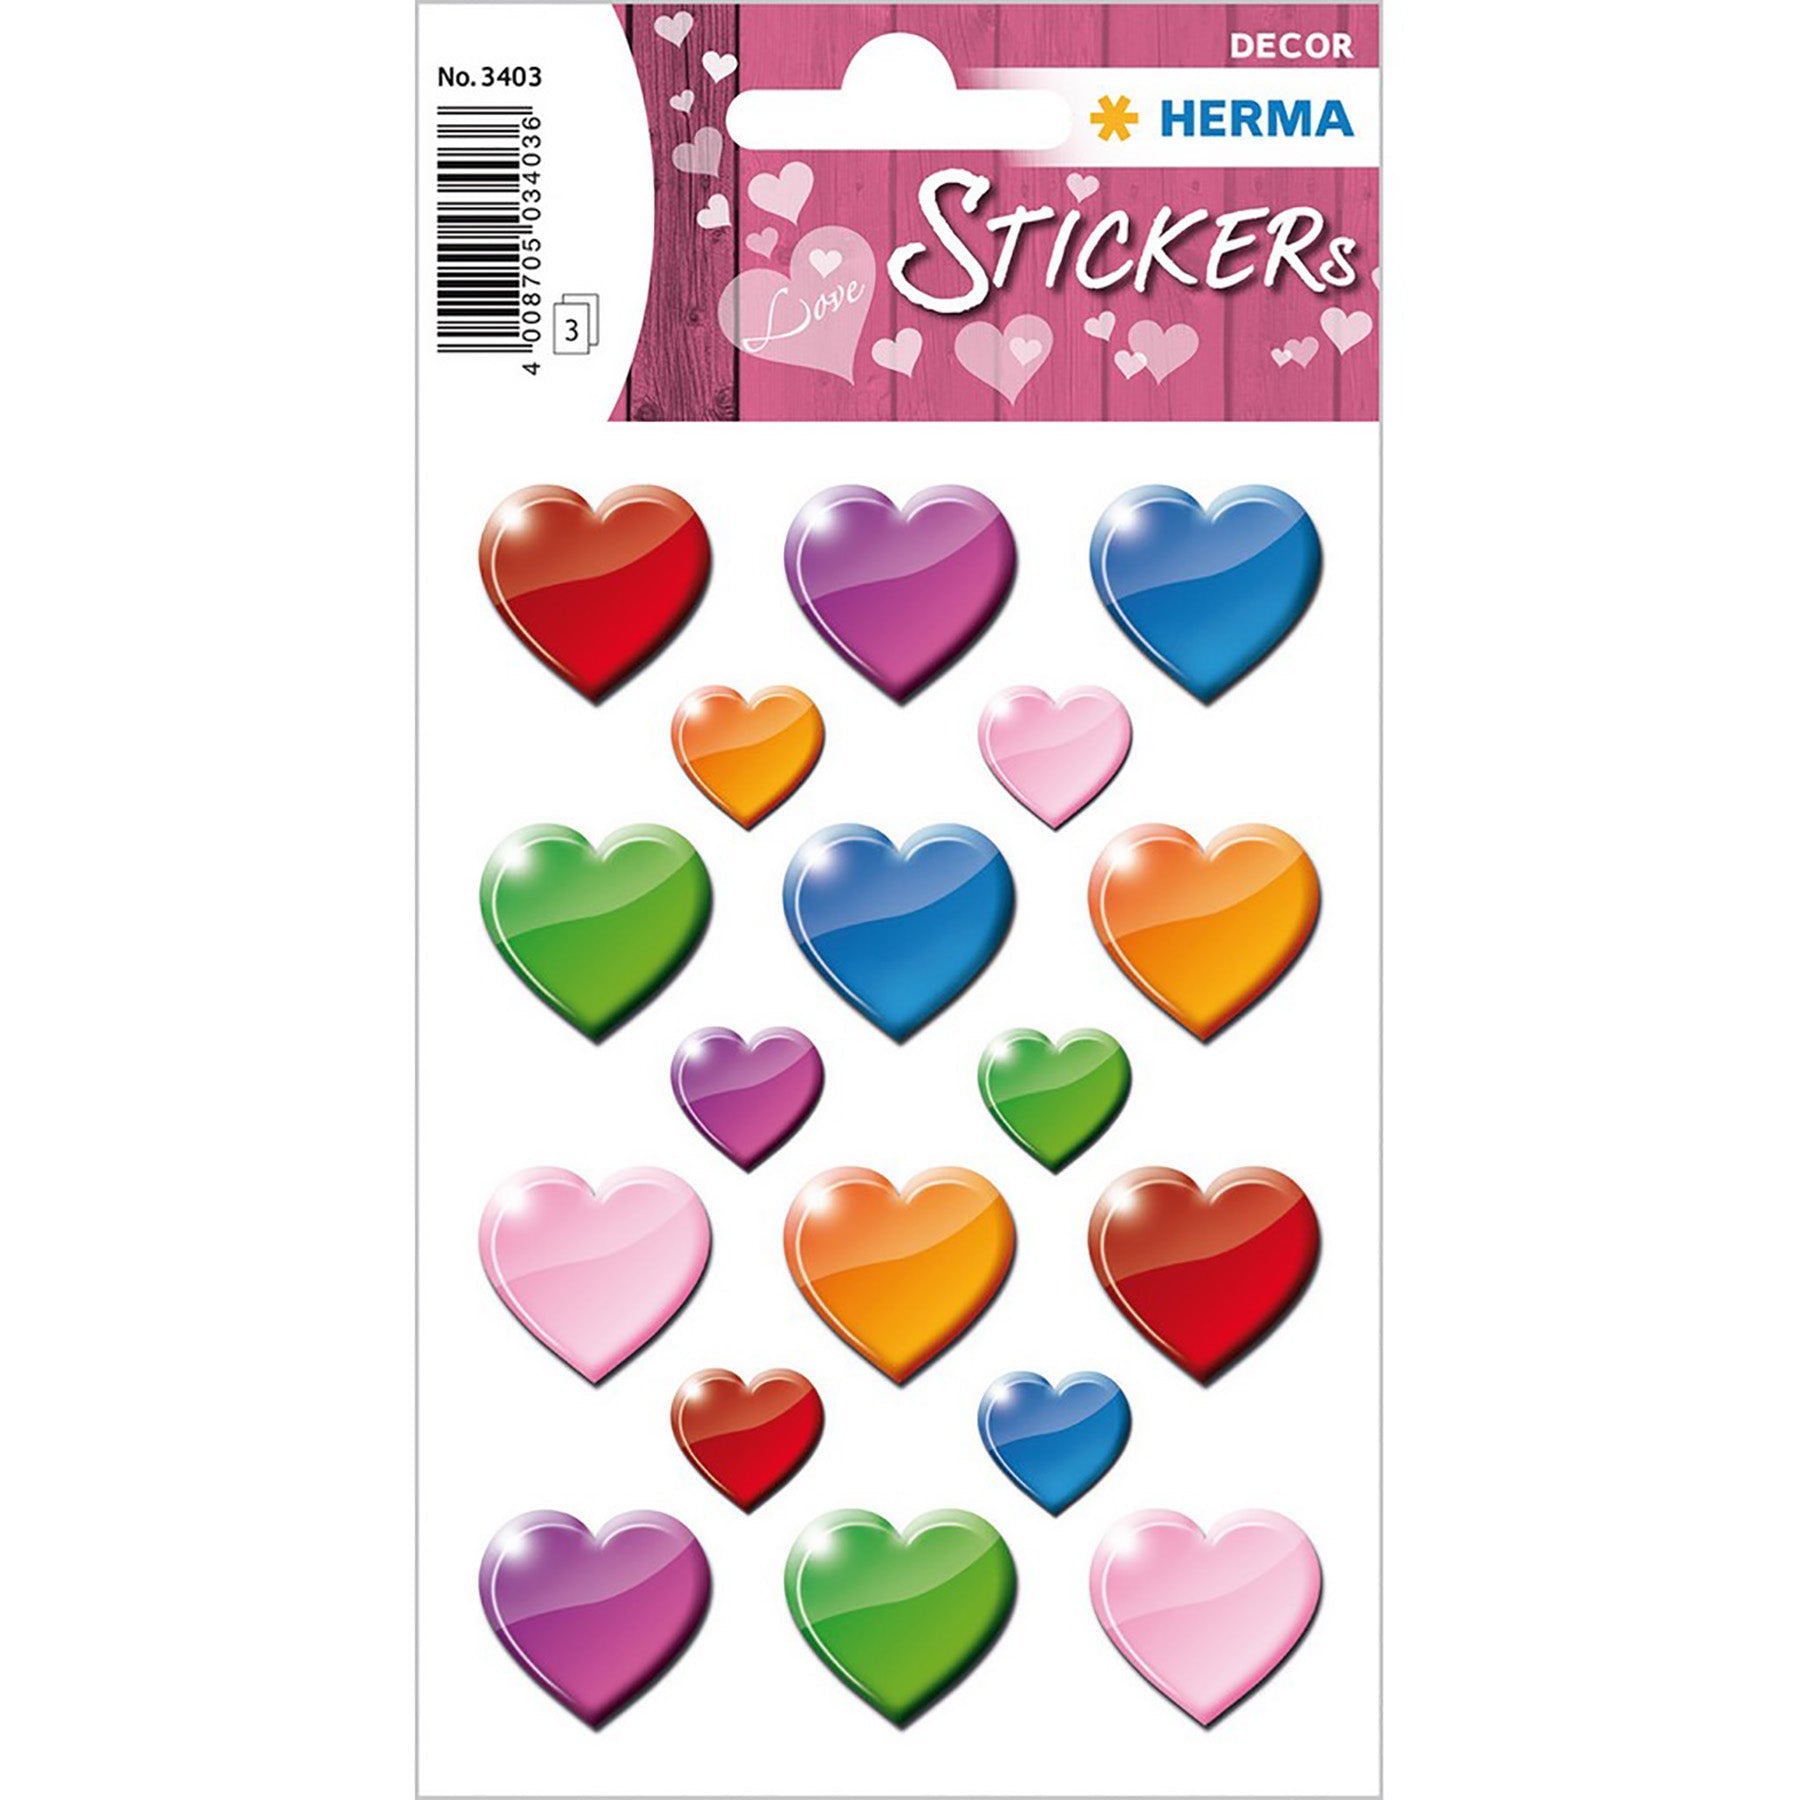 Herma Decor 3 Sheets Stickers Colored Hearts 4.75x3.1in Sheet